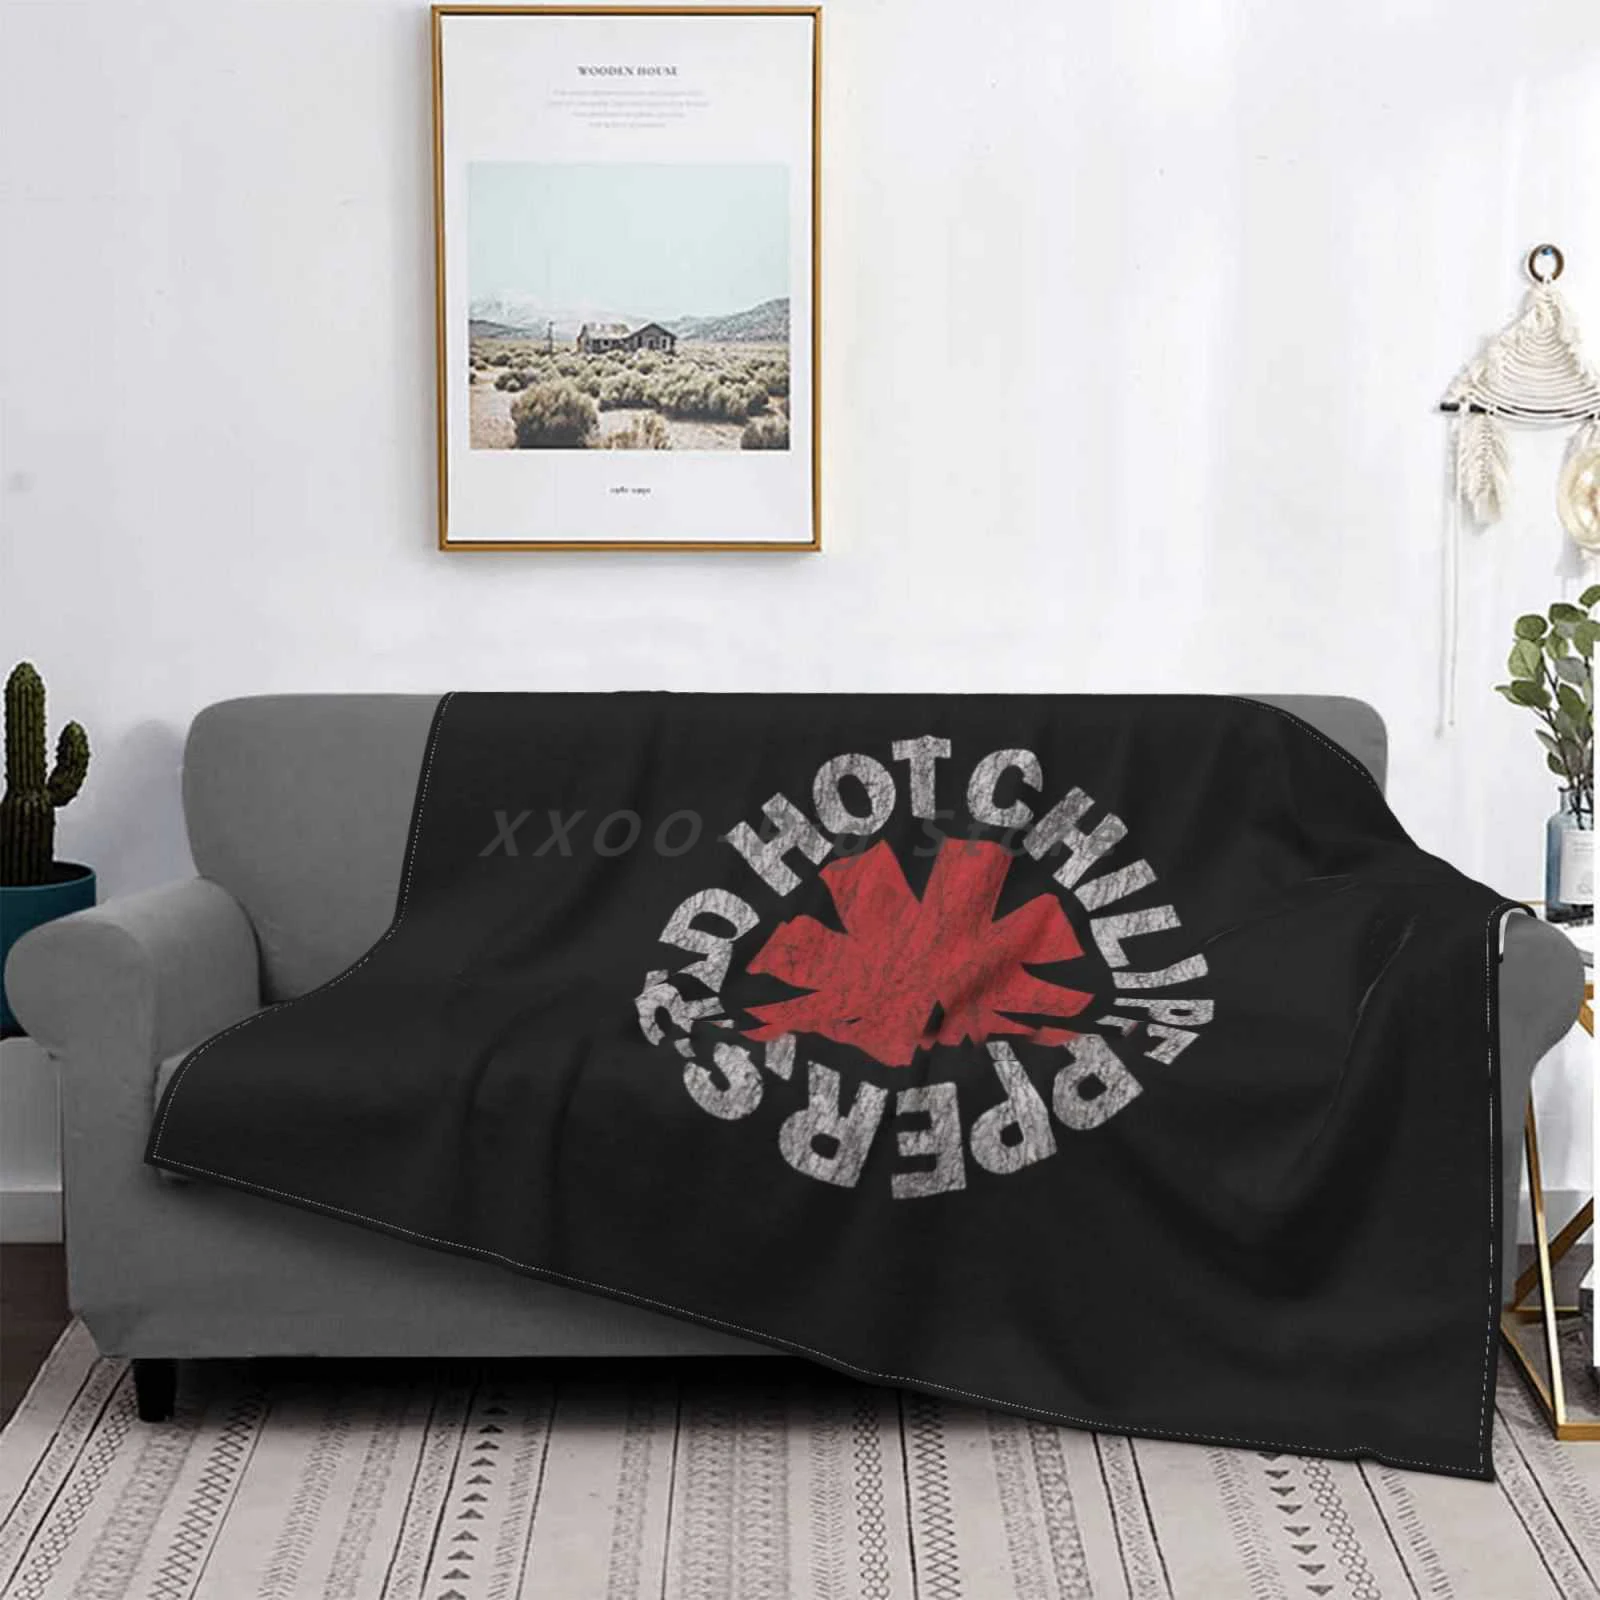 

Vintage Super Warm Soft Blankets Throw On Sofa/Bed/Travel Red Hot Logo Chili Cool Peppers